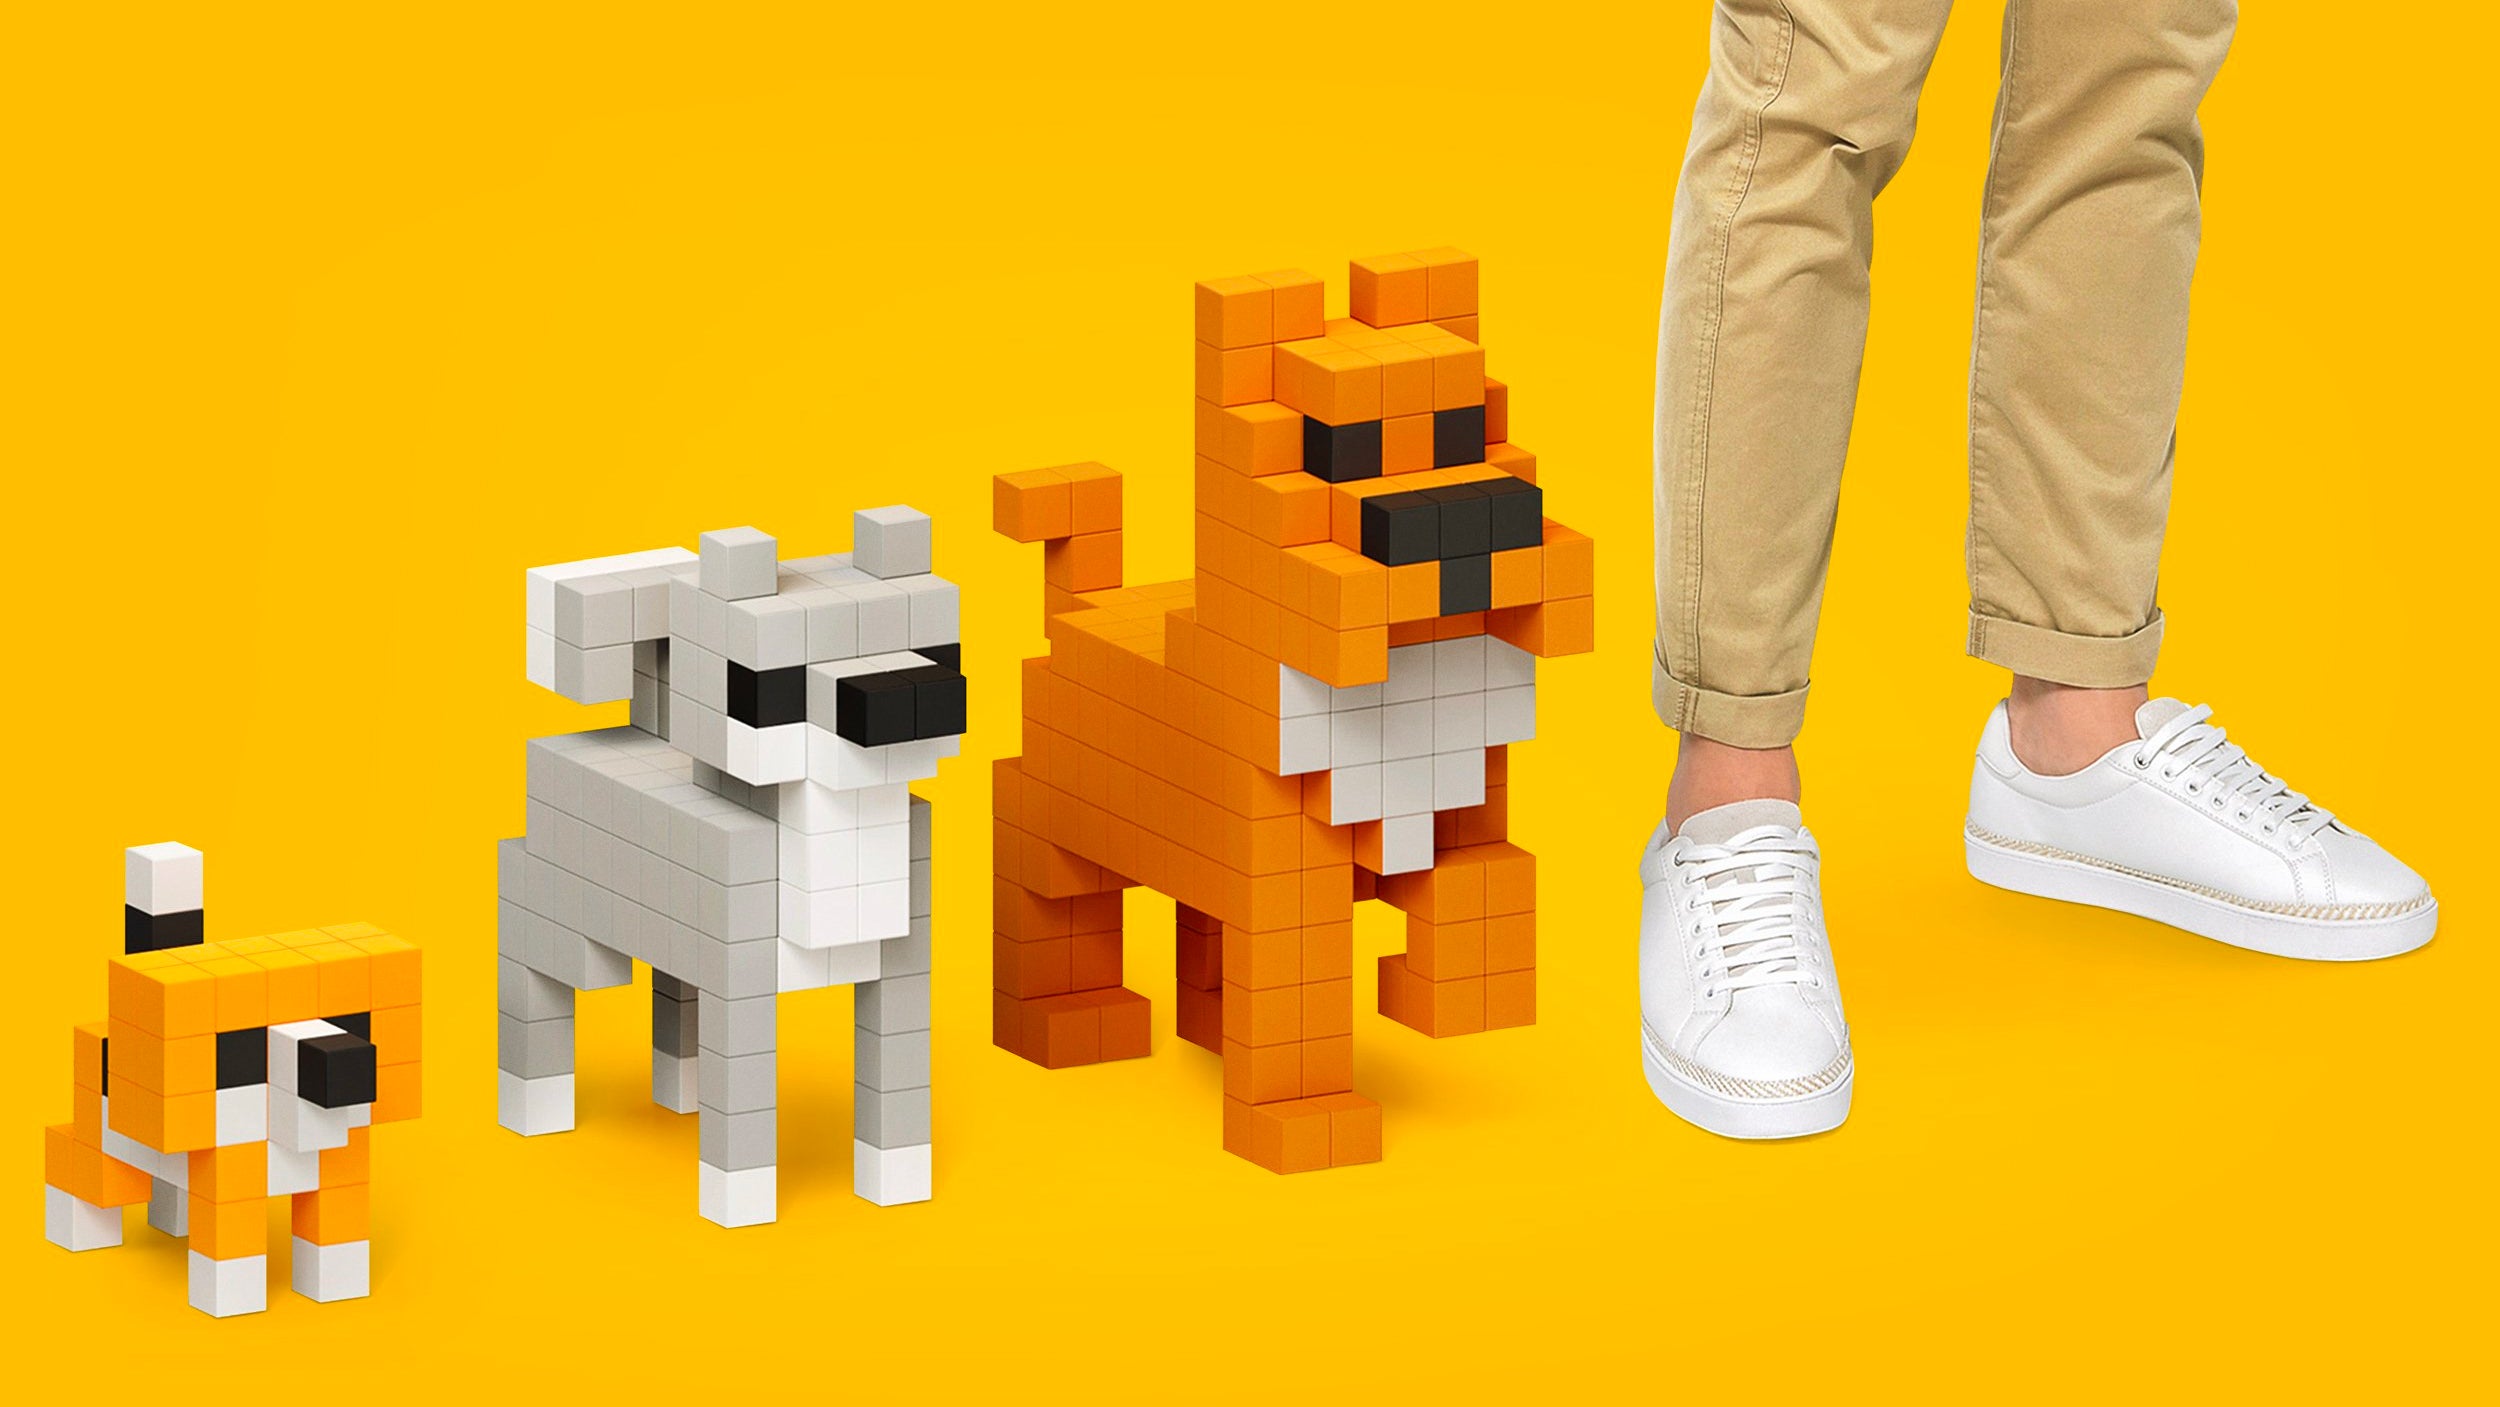 You Can Minecraft Your Life With These Pixelated Building Toys